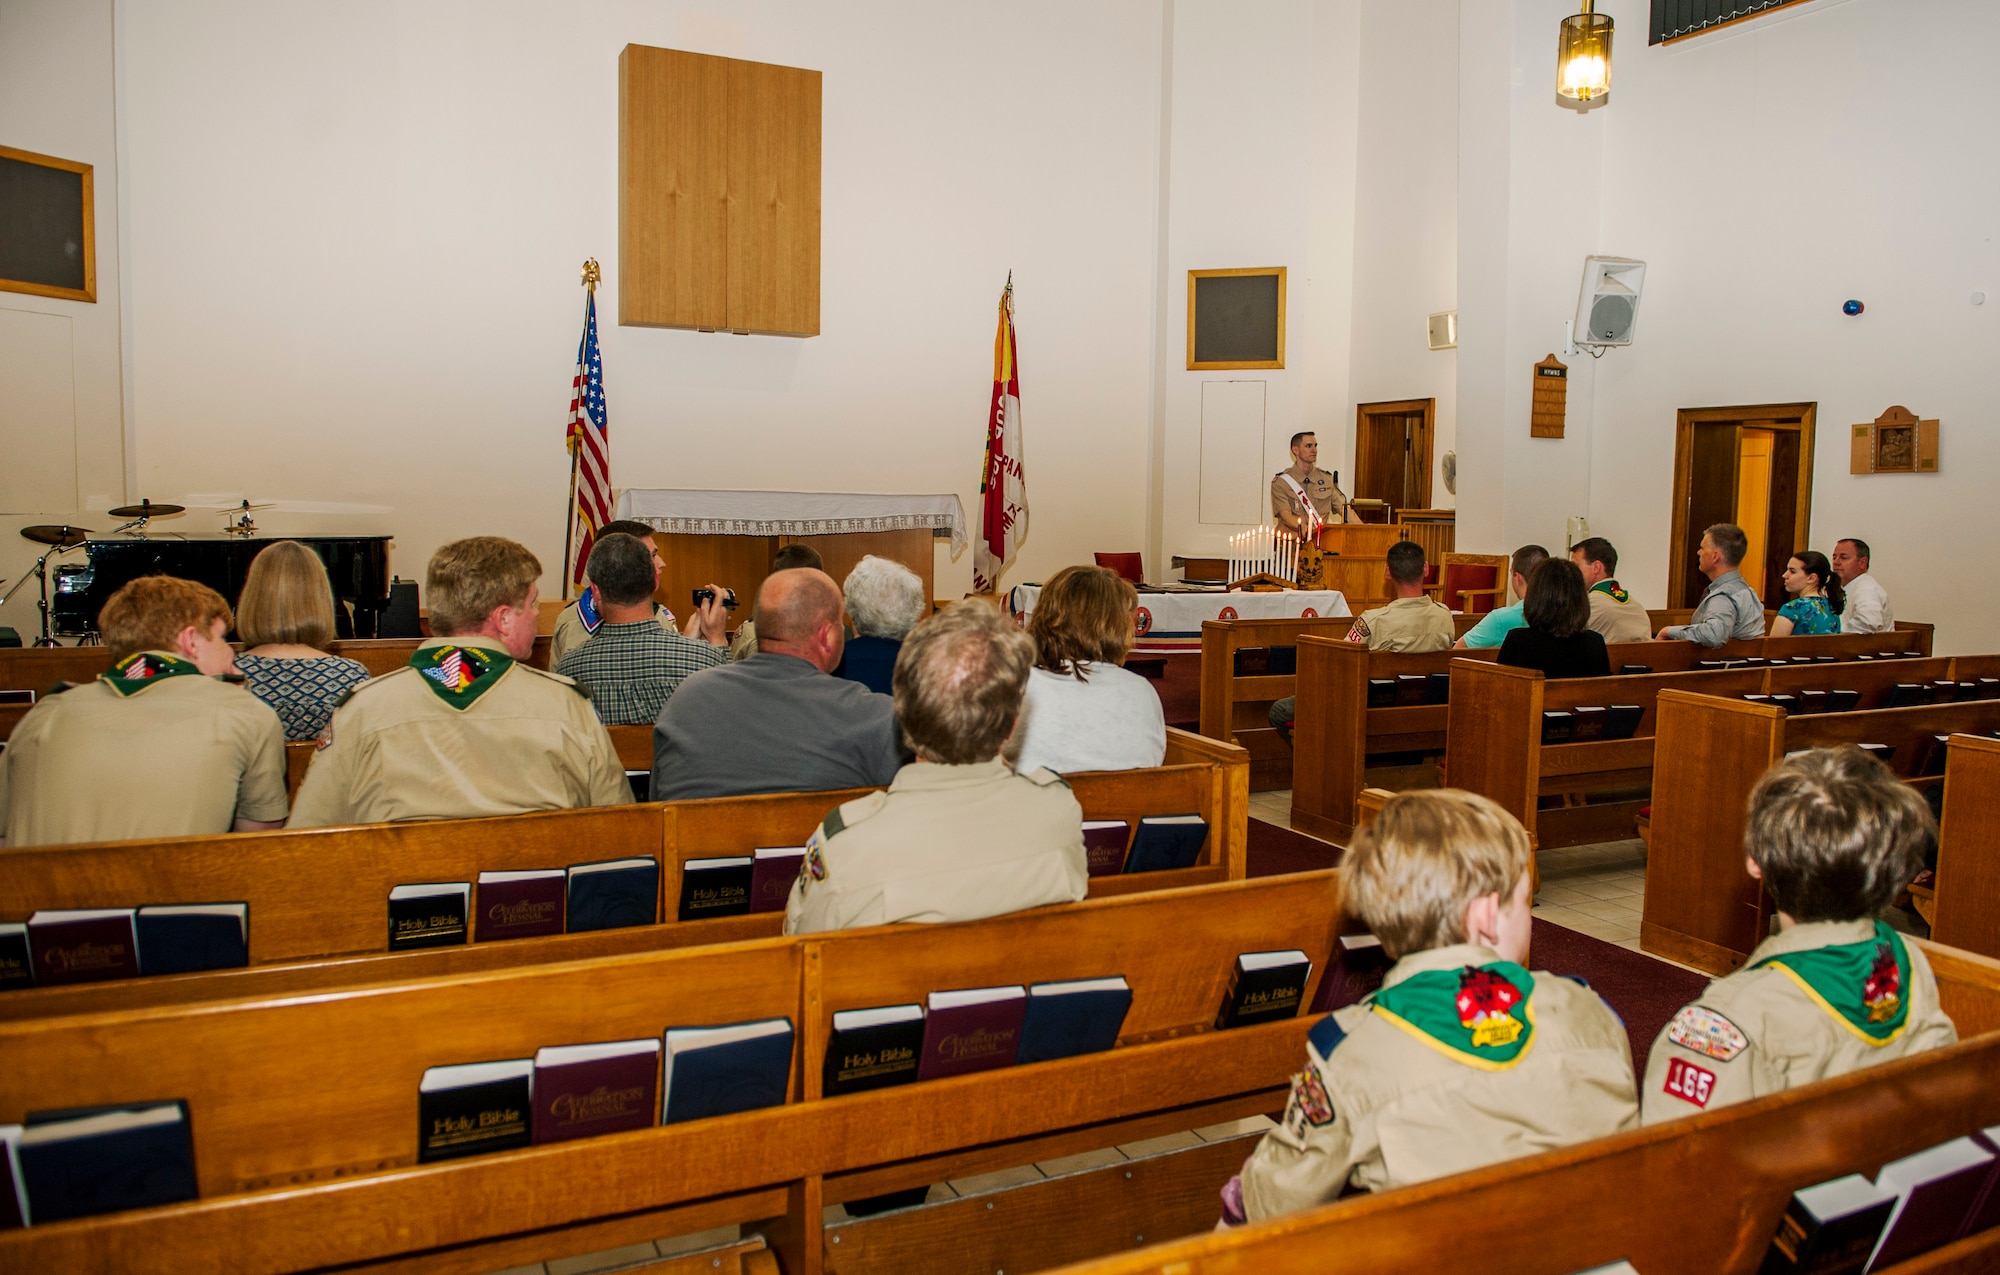 Spangdahlem community members participate in a recognition ceremony in the base chapel at Spangdahlem Air Base, Germany, May 18, 2016. The family and friends of Daniel and Matthew O’Connor, both Boy Scouts of America Troop 165 Eagle Scouts, attended the ceremony in which the scouts received their ranks. (U.S. Air Force photo by Airman 1st Class Timothy Kim/Released)